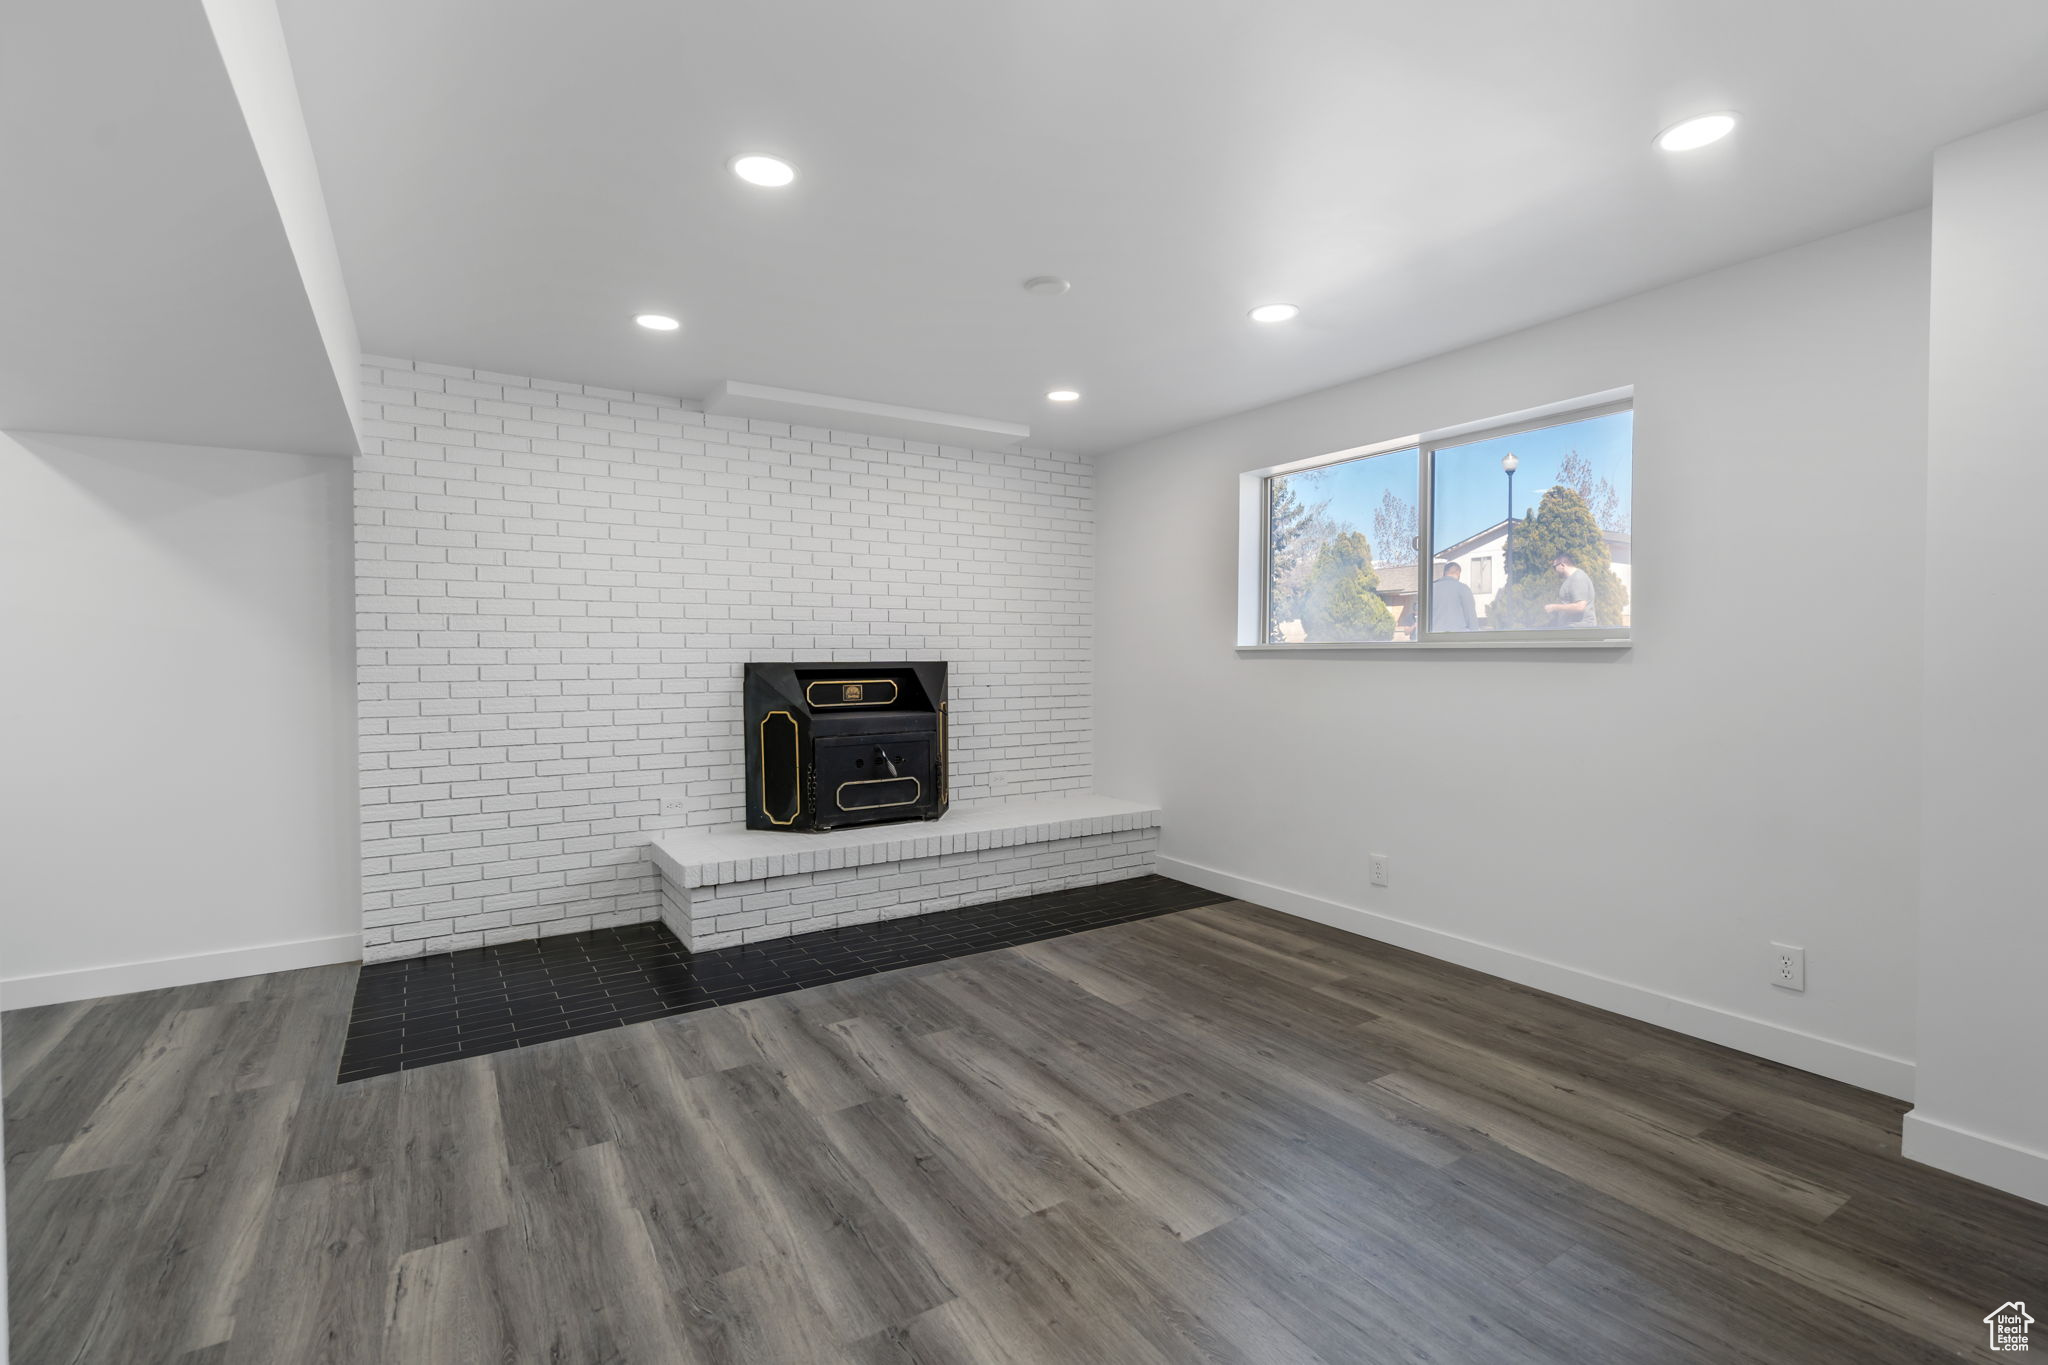 Unfurnished living room featuring dark hardwood / wood-style floors, brick wall, and a brick fireplace